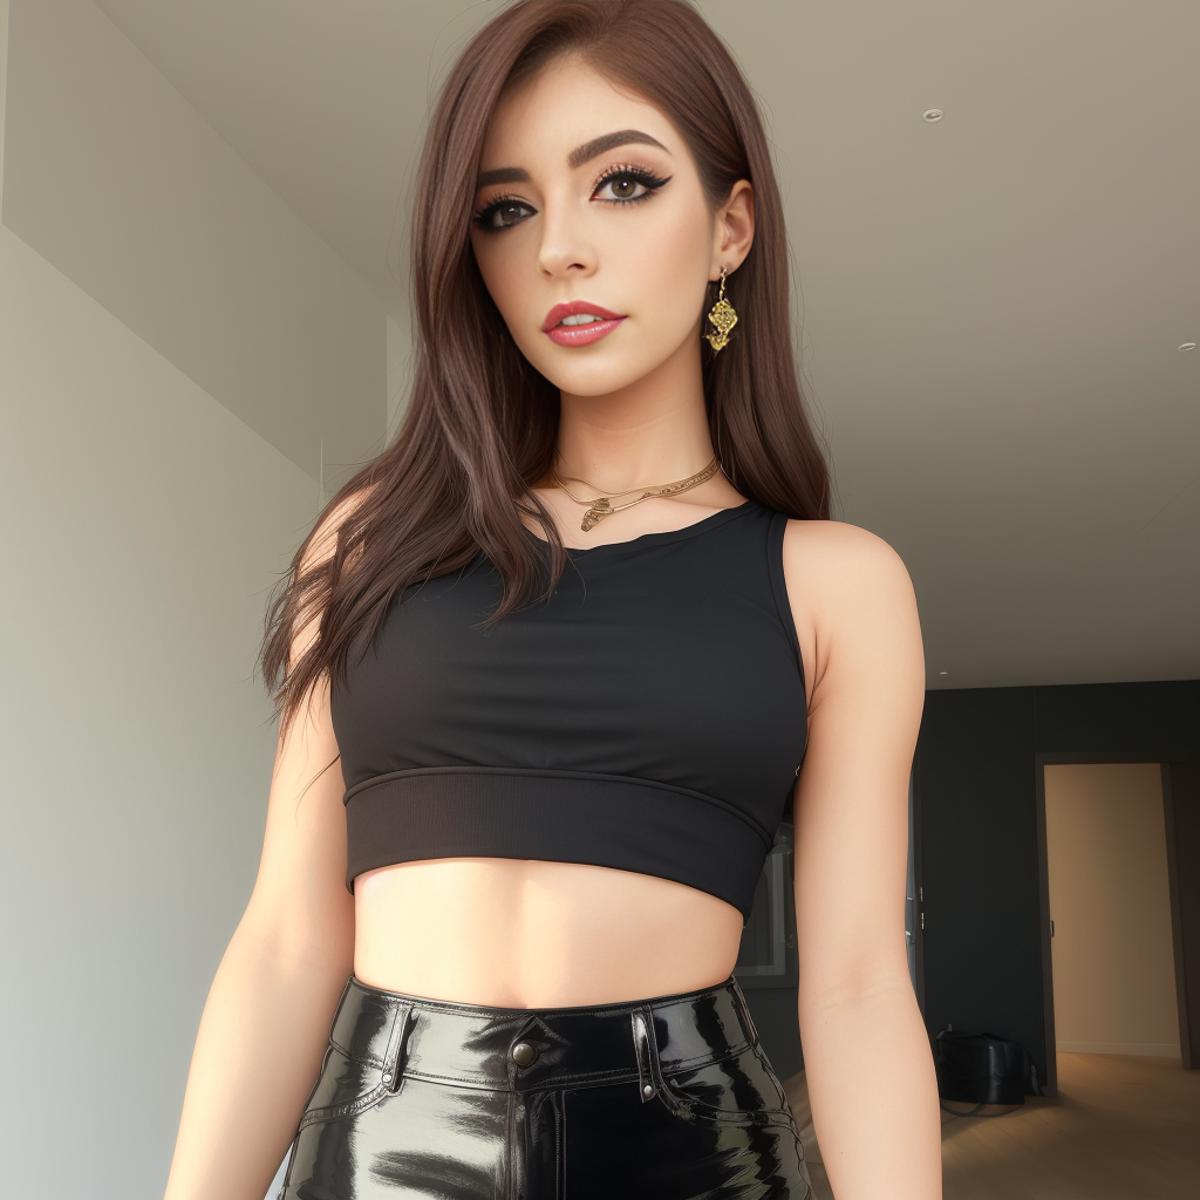 caroline breakwell recommends chrissy costanza sexy pic